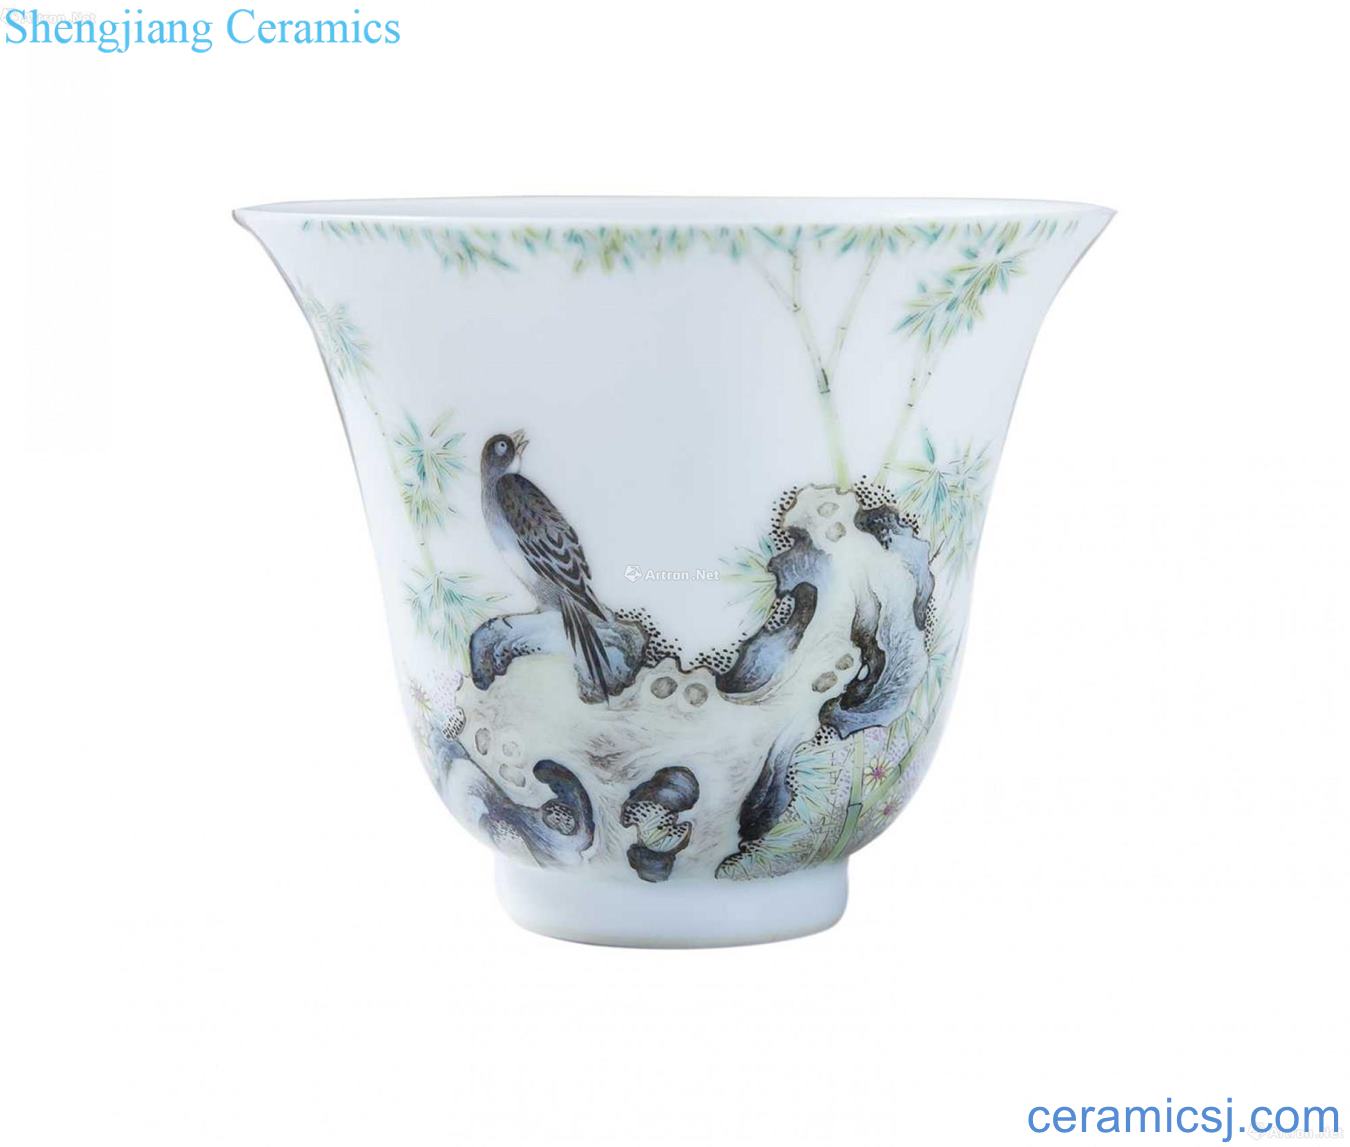 The colored enamel painting of flowers and grain cup